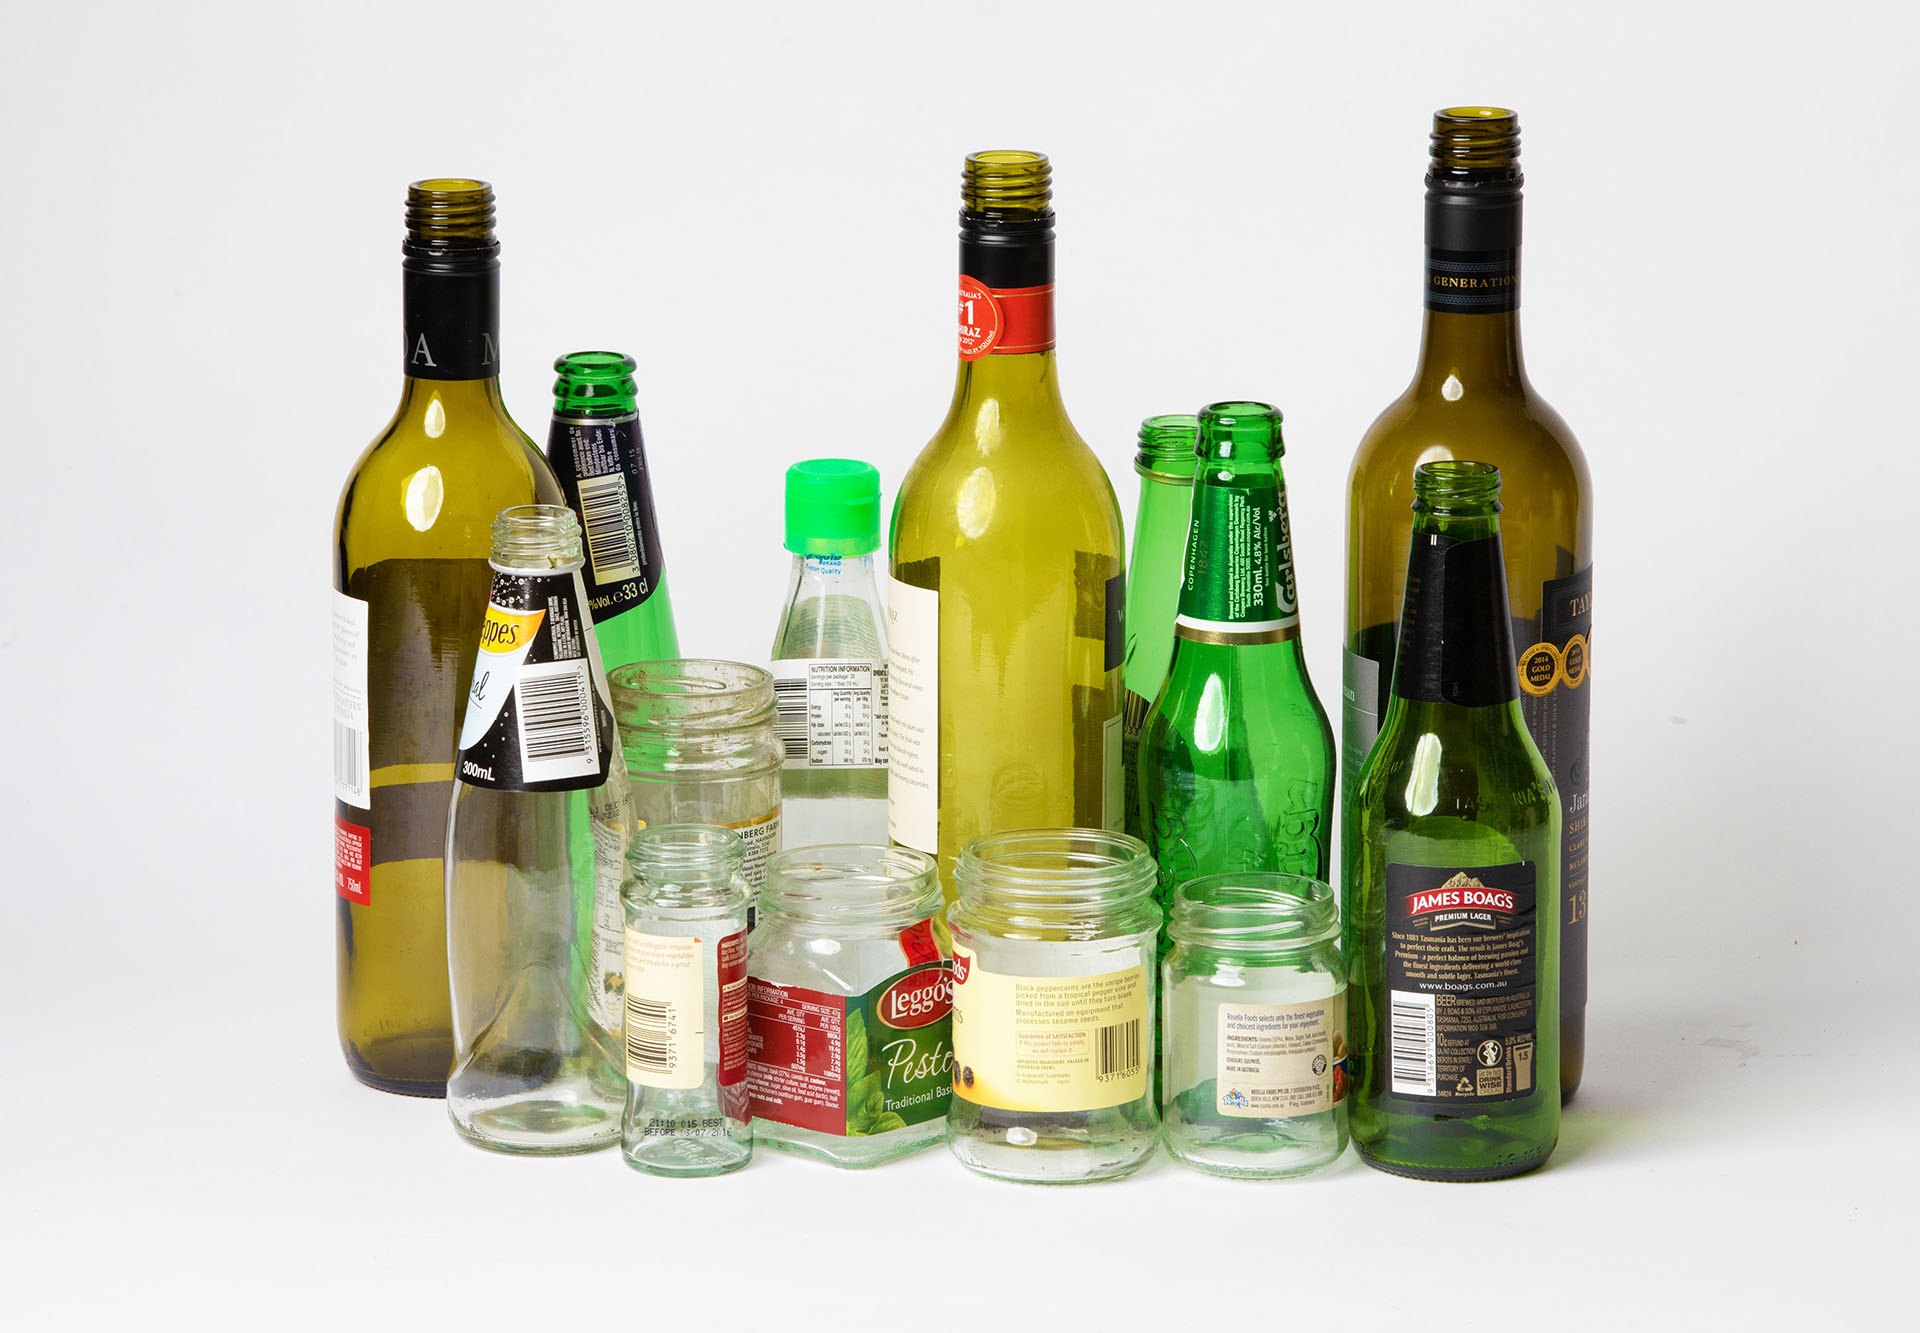 Image of glass bottles and jars